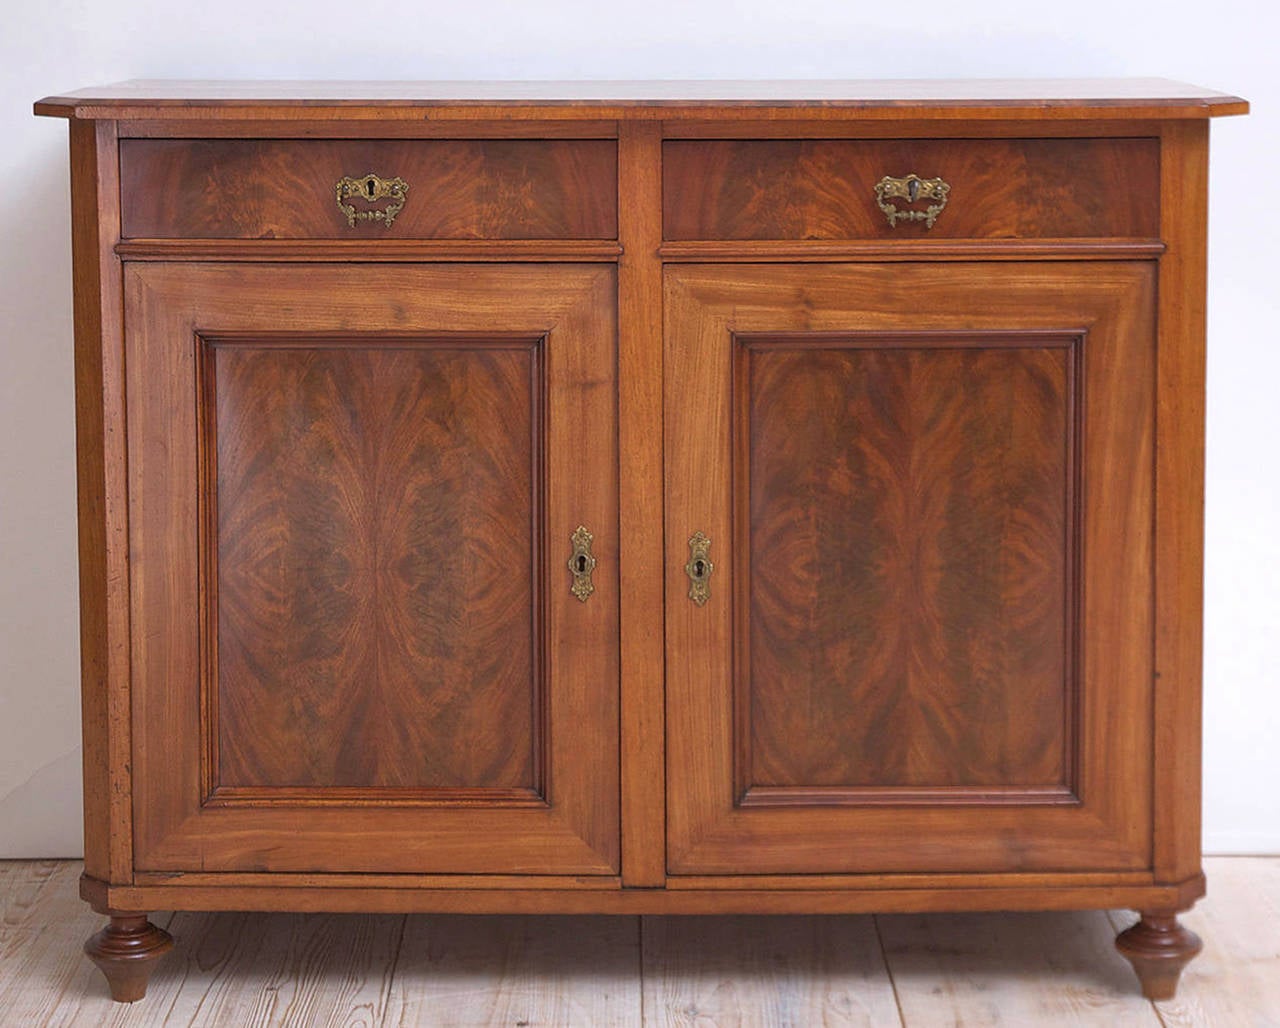 A cabinet or buffet in walnut with book-matched figured walnut on panels of two doors and drawer fronts. Offers original hardware, locks, and turned feet. Northern Europe, circa 1880.

50